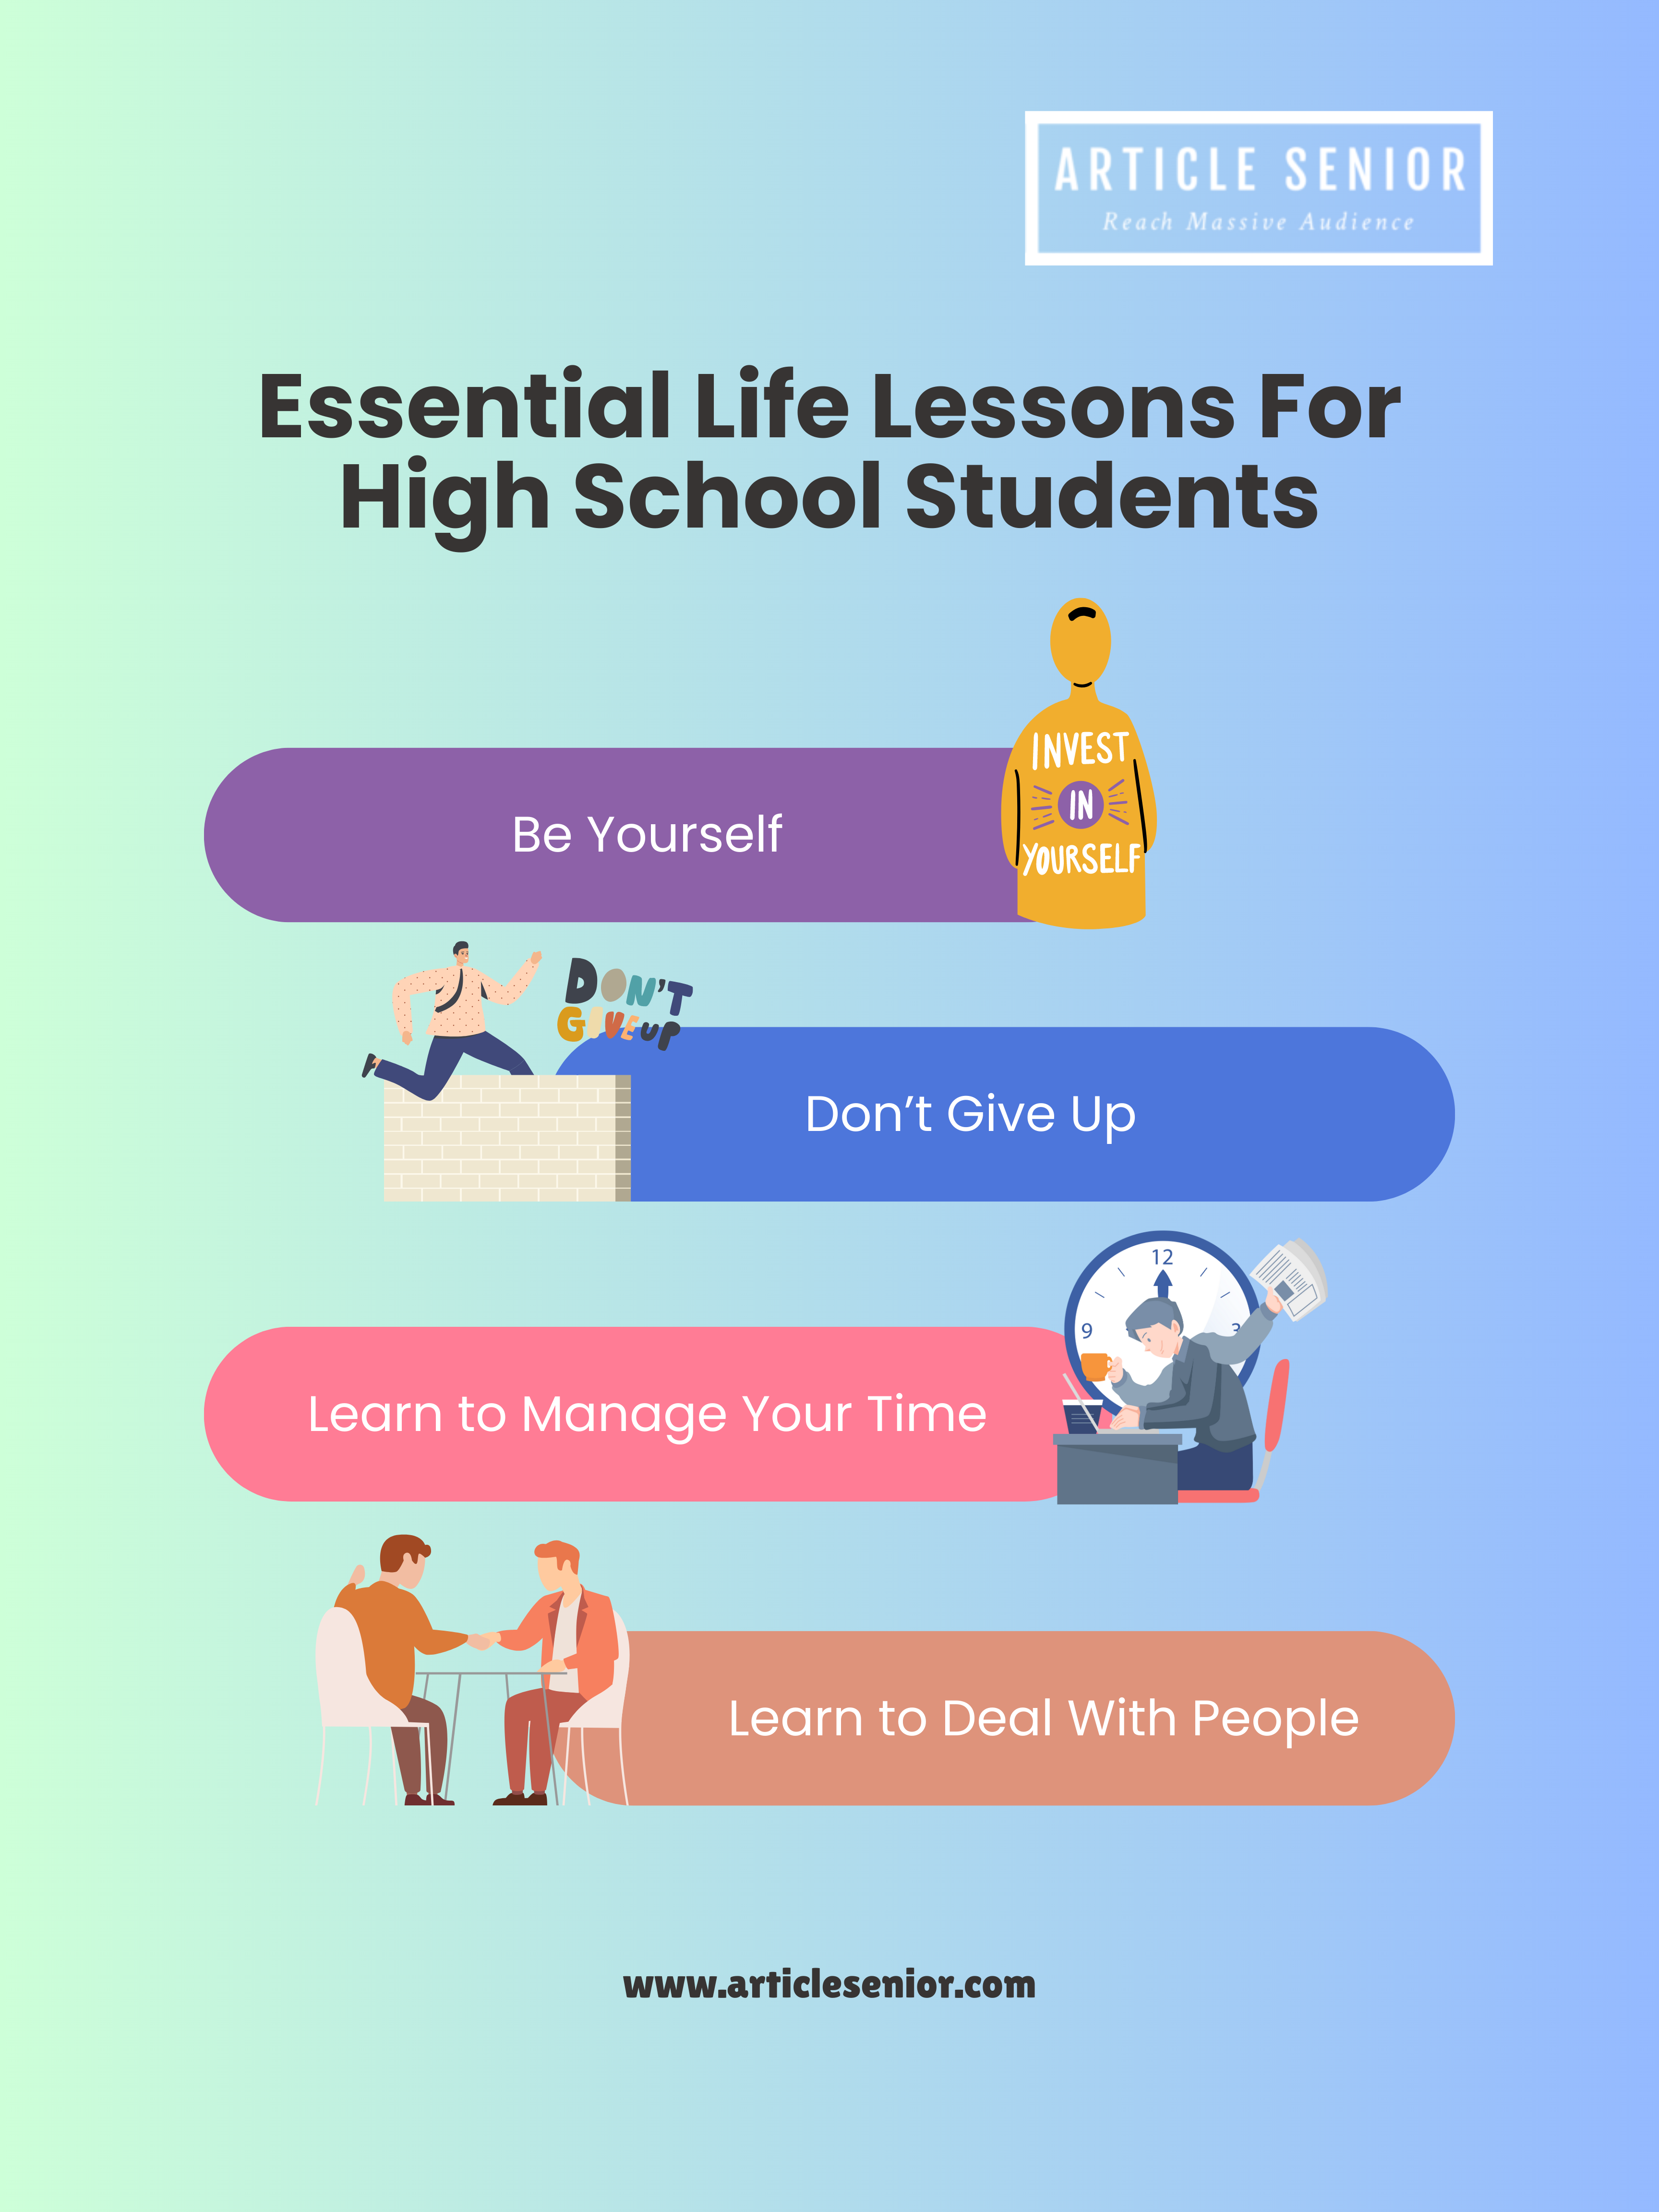 Life lessons for high school students infographic